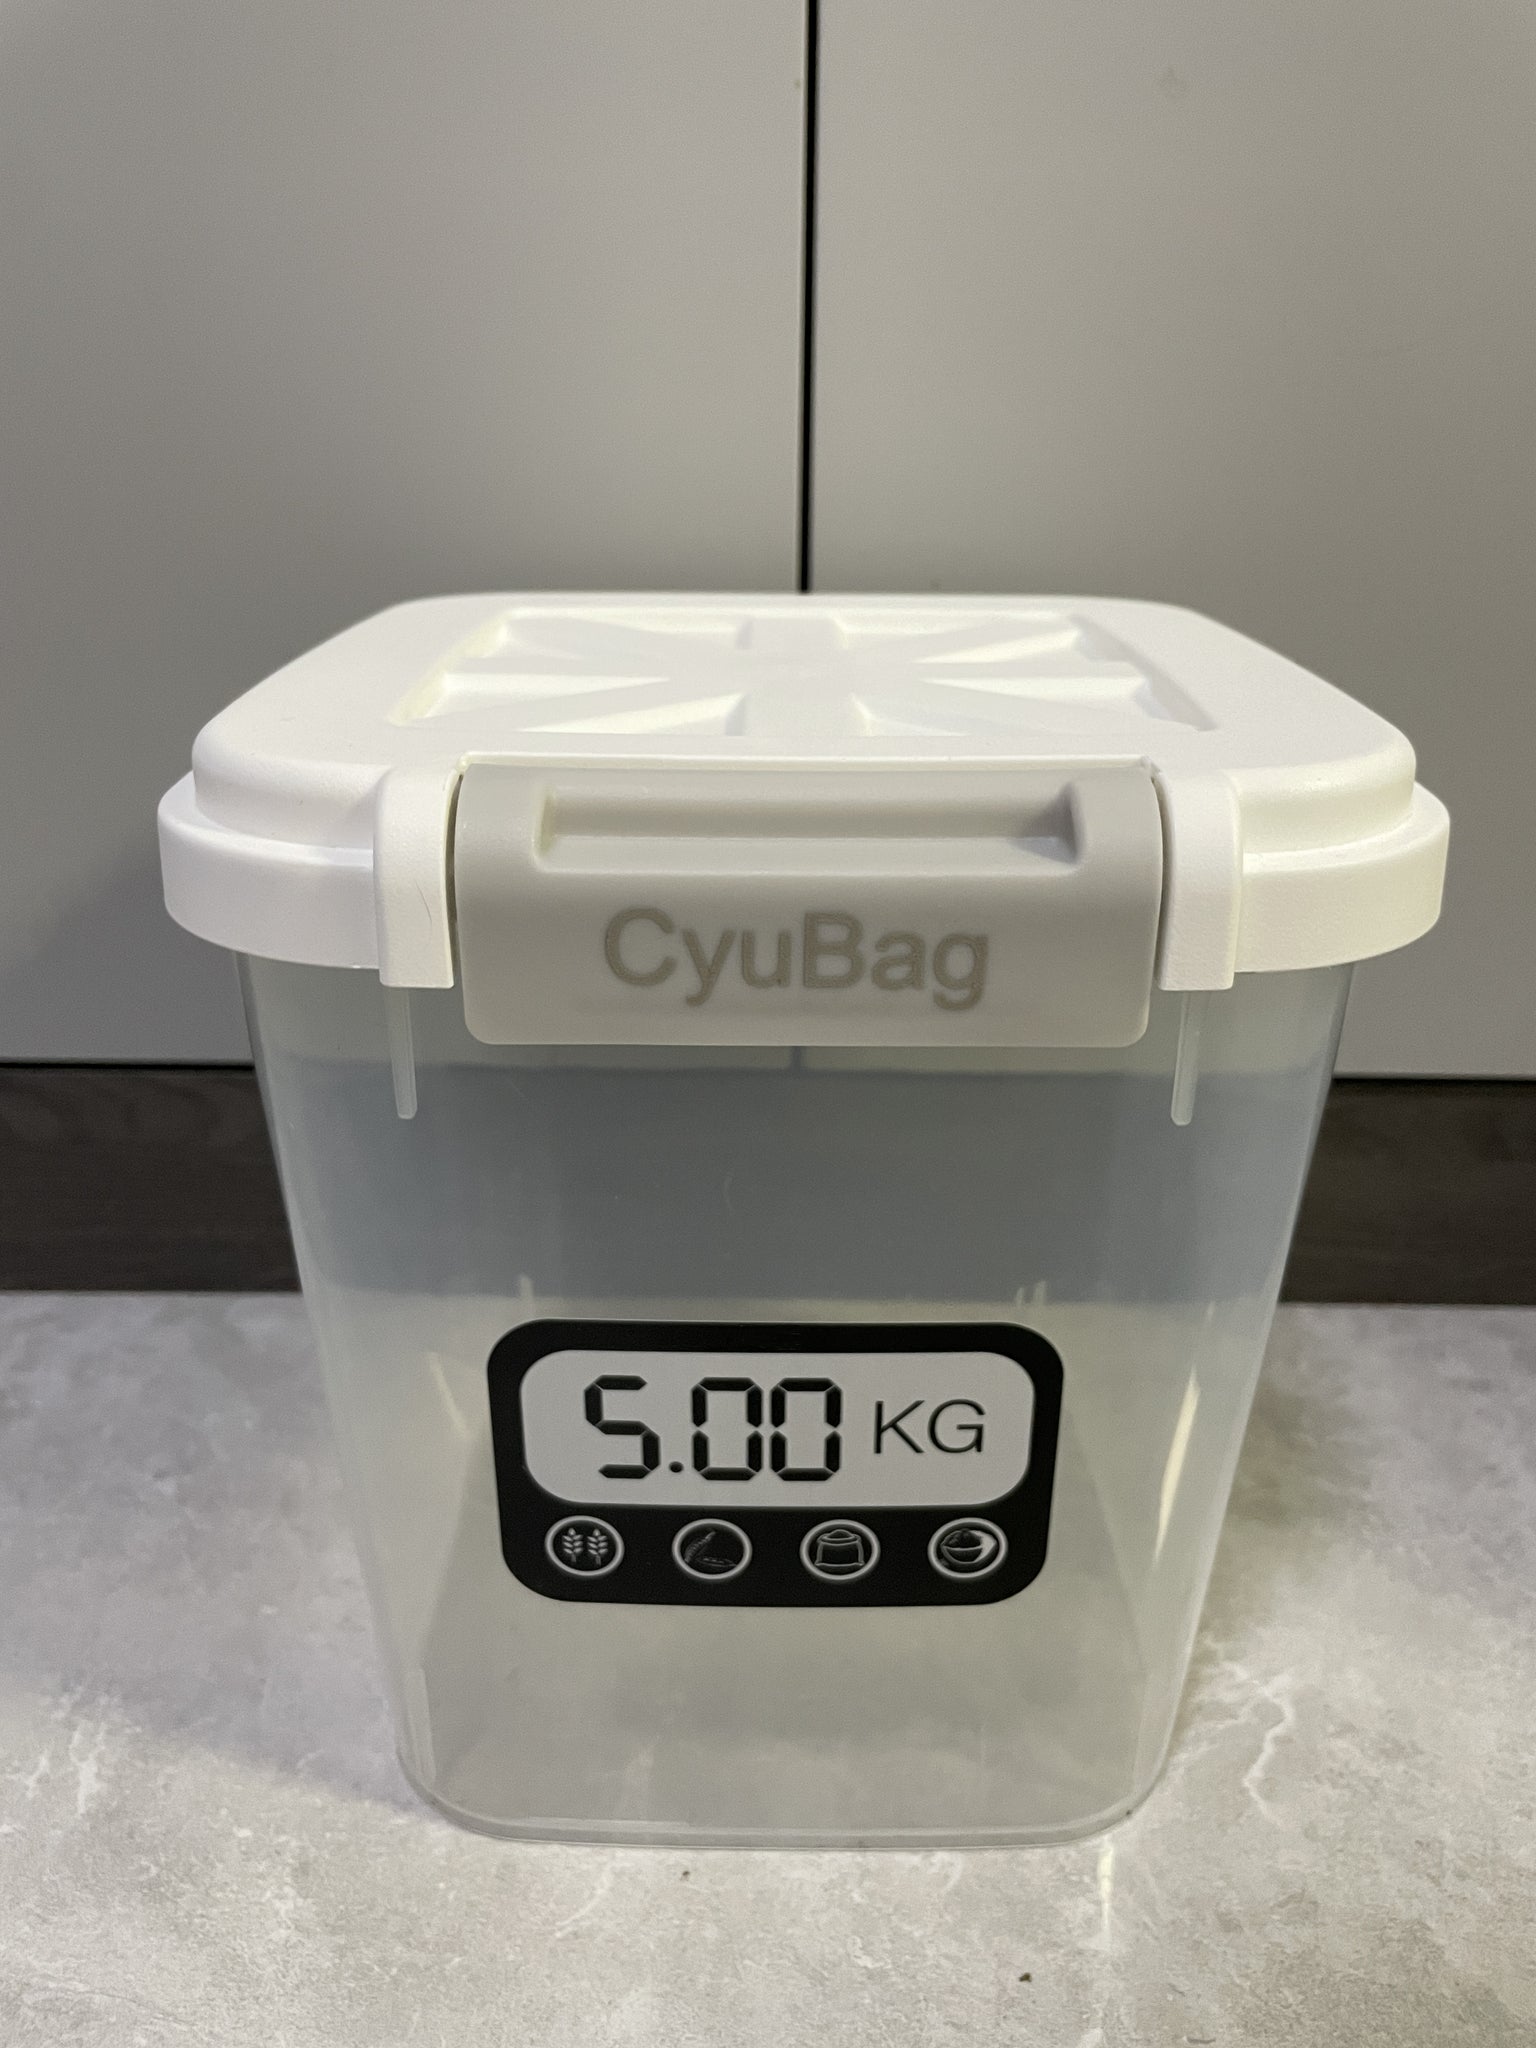 CyuBag-Household containers for rice, grain-Plastic storage containers-FOR 5KG